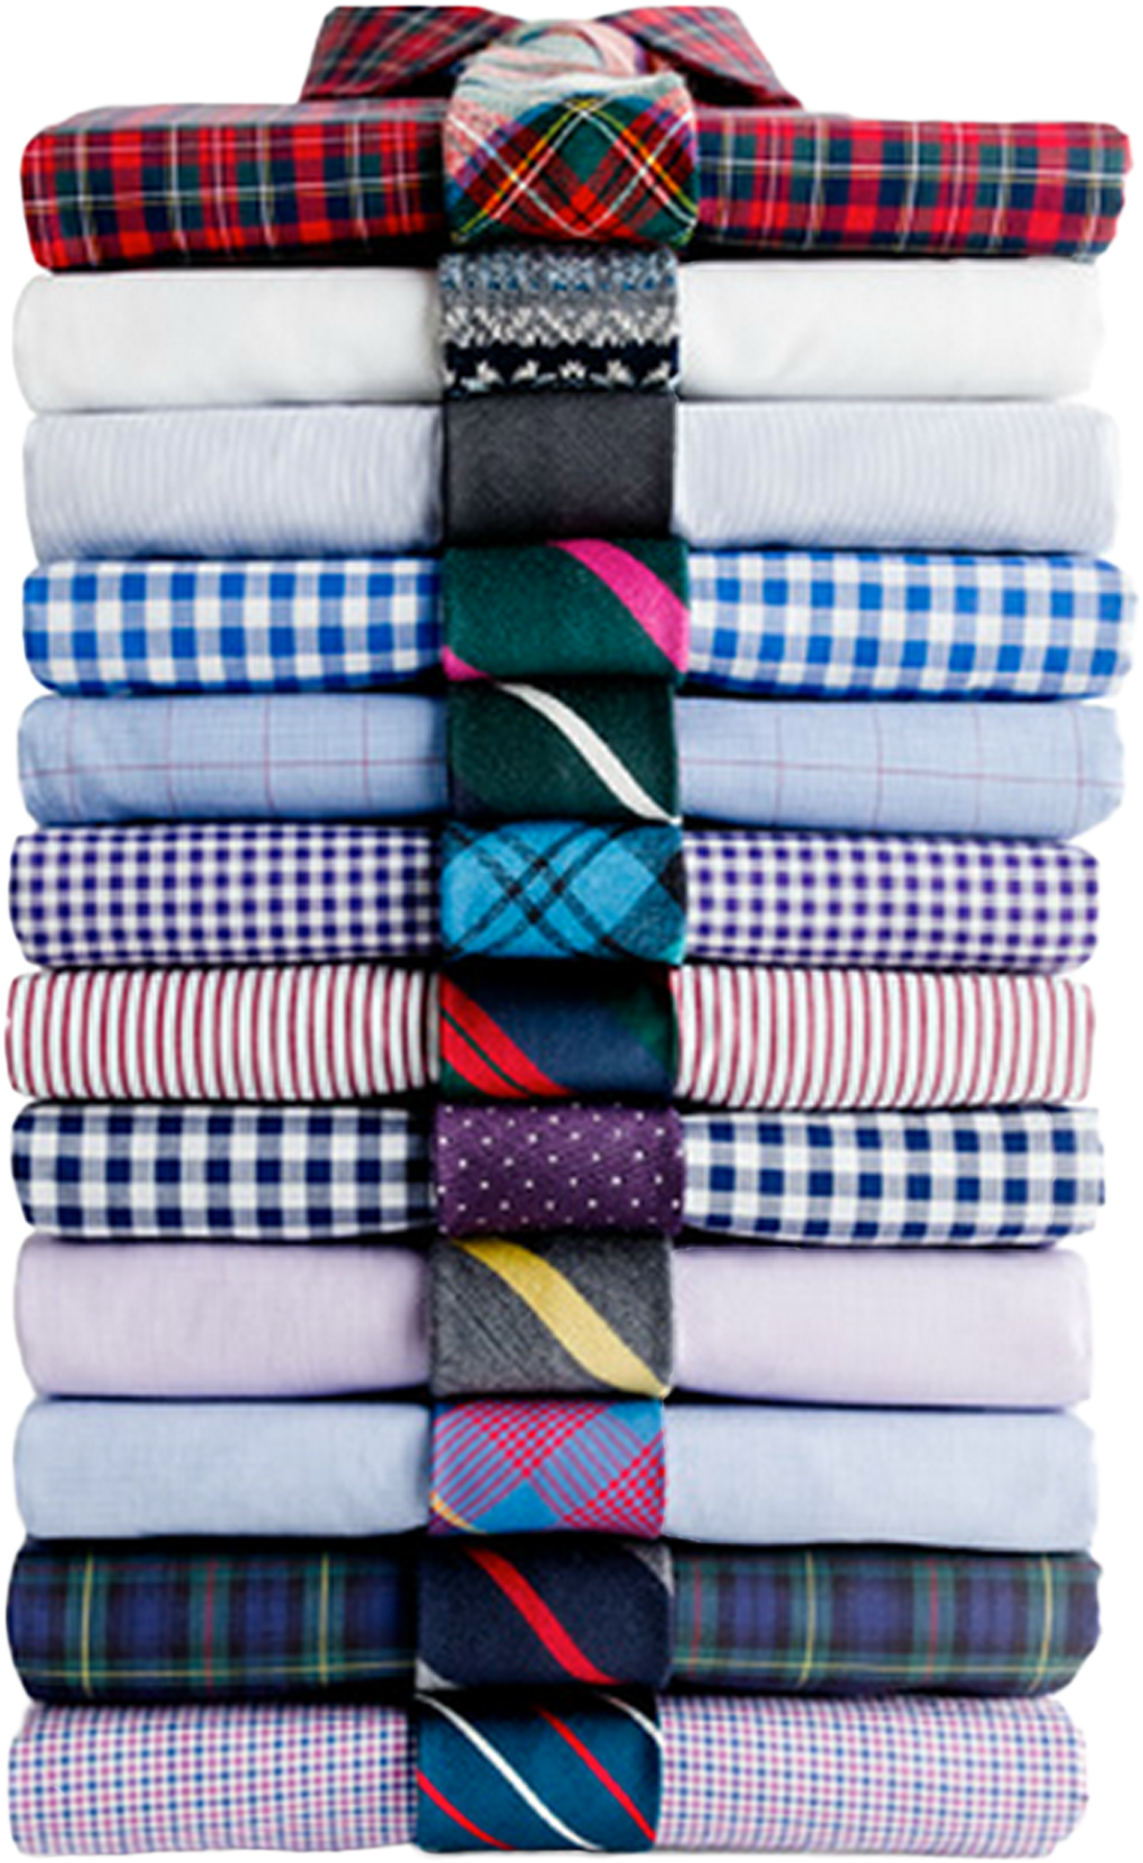 A Stack Of Ties Stacked On Top Of Each Other